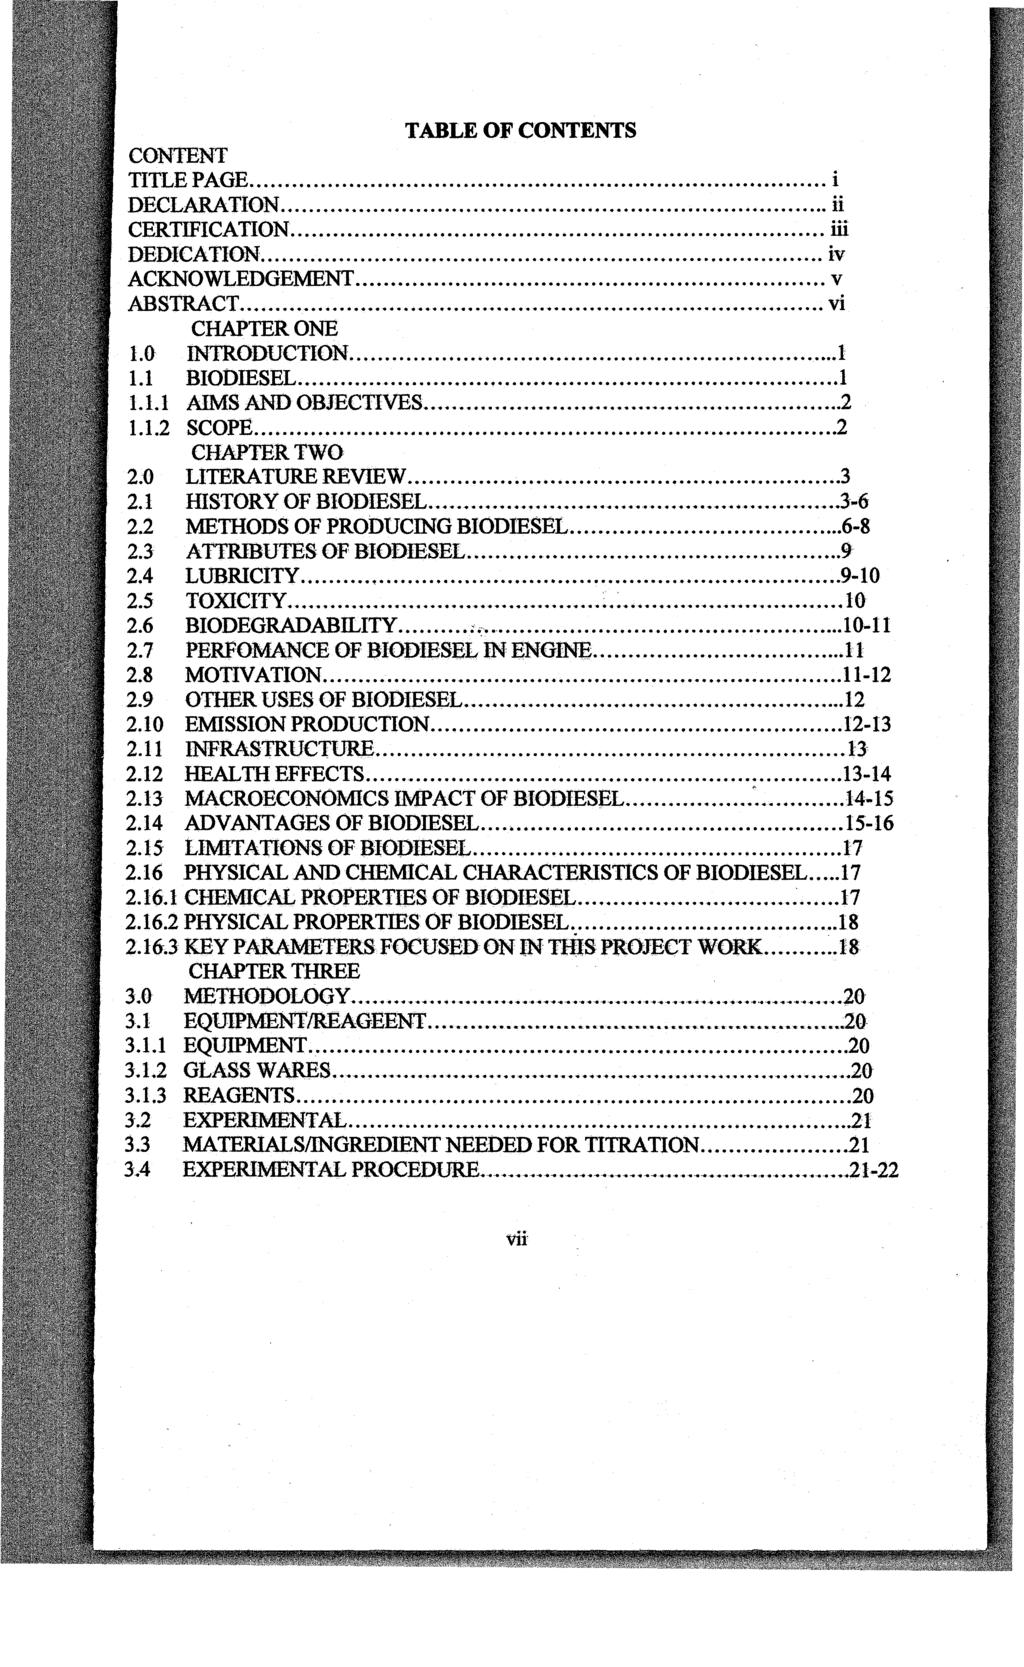 TABLE OF CONTENTS CONTENT TITLE PAGE...""""""."..."...".""... ""..."... ""... "."...""."".."...""."""..,,,,... i I>EC~~TION... ii CERTIFICATION.